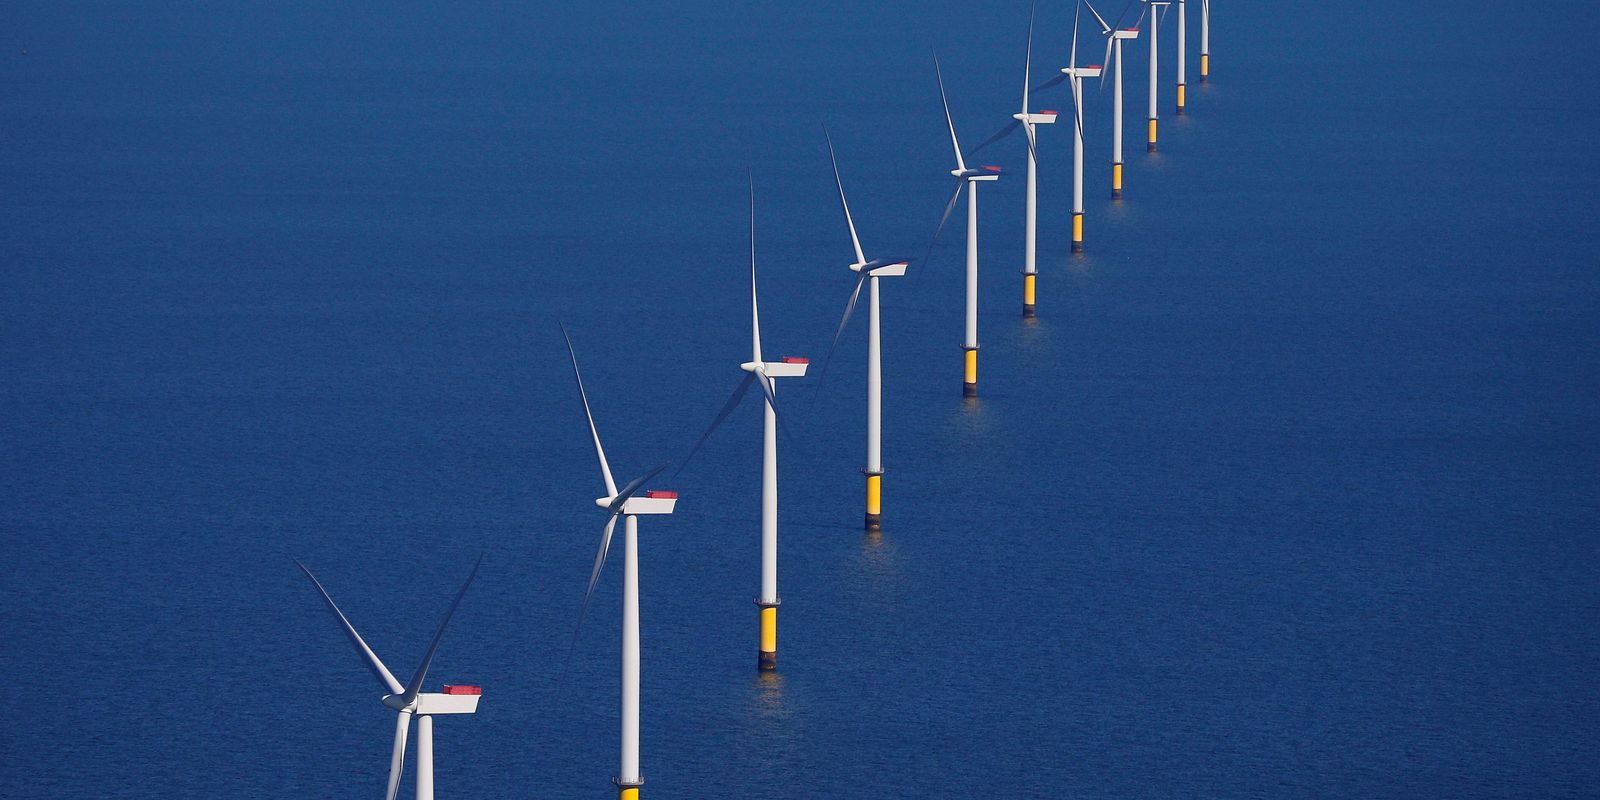 Offshore wind power could boost Brazil's energy transition